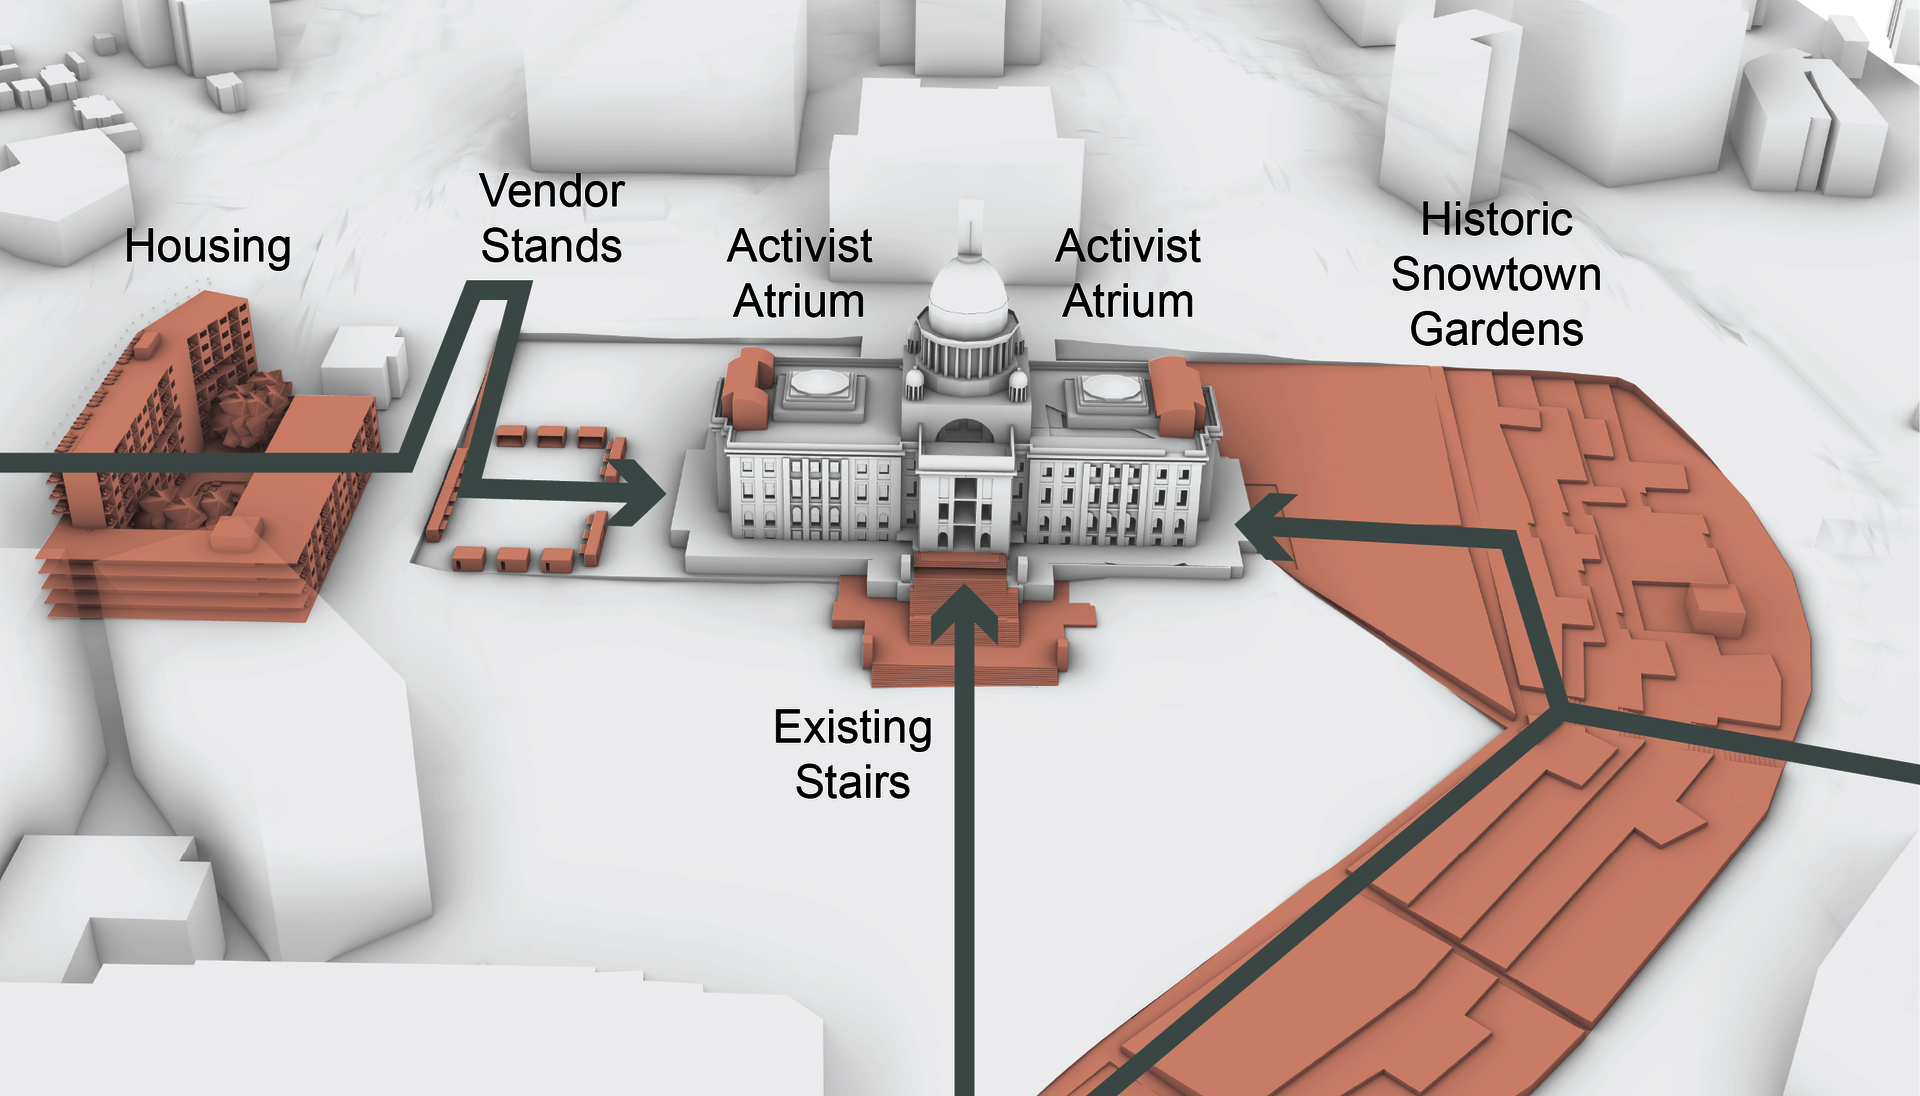 This diagram highlights the proposed structures and connections being created around the Rhode Island State House.